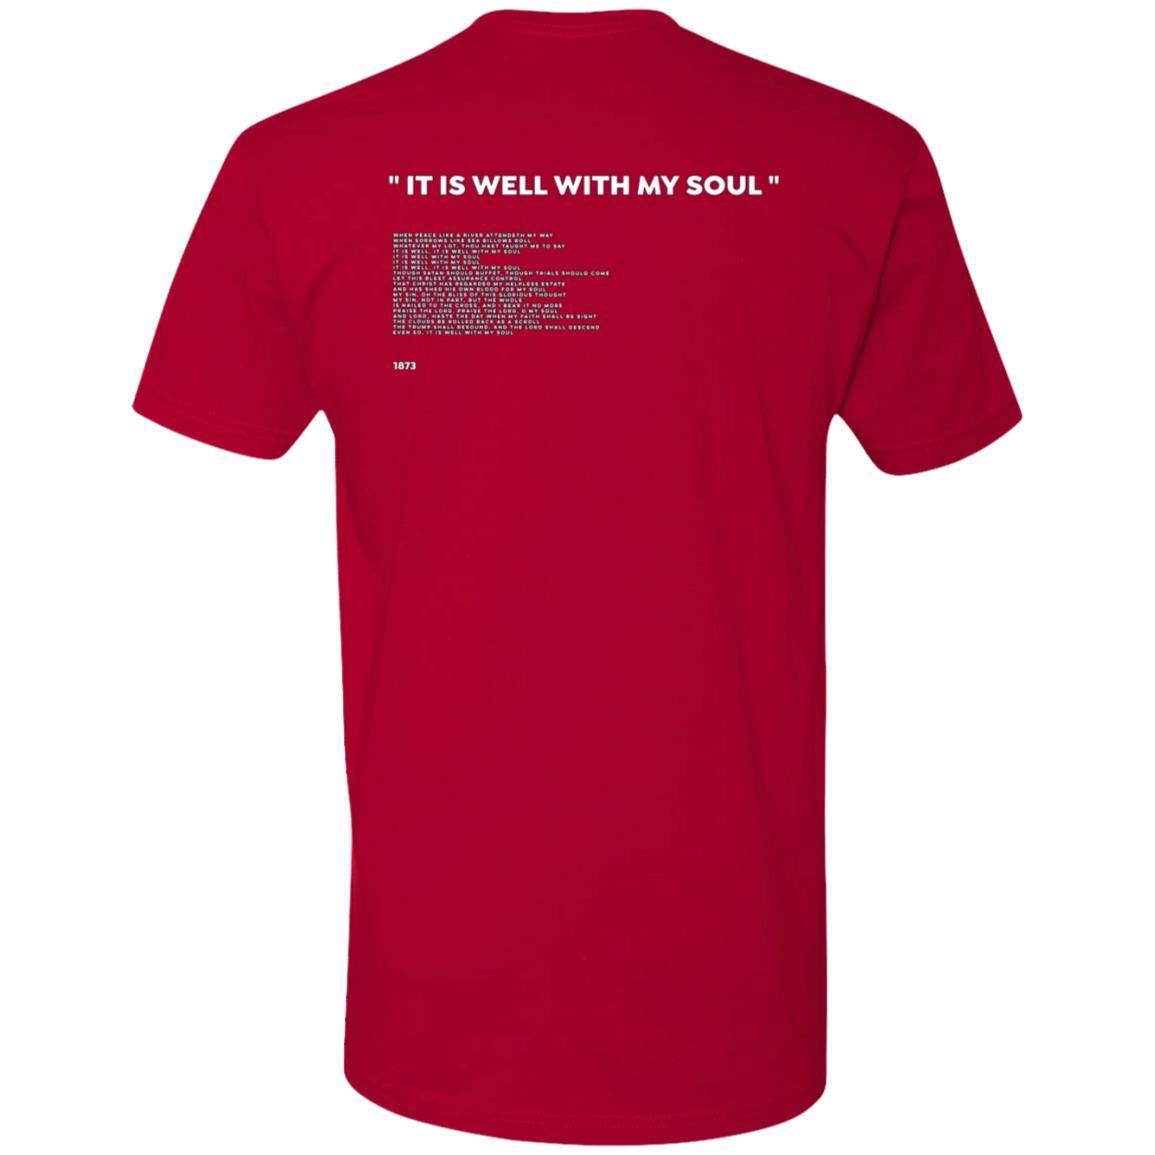 It is Well with my Soul (Unisex Tee)